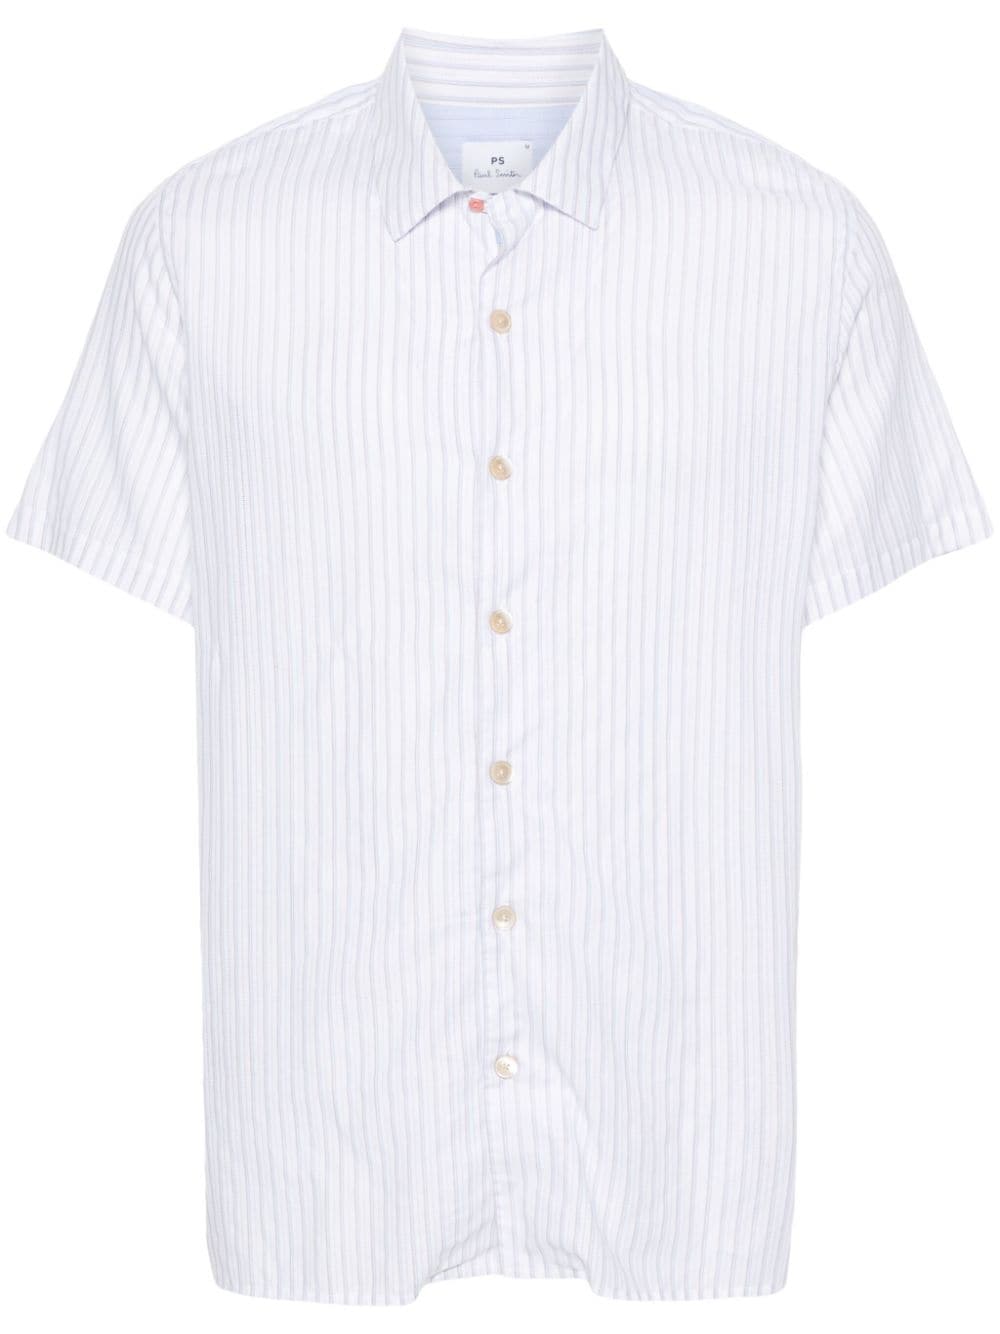 Ps By Paul Smith Halo-stripe Cotton Shirt In White